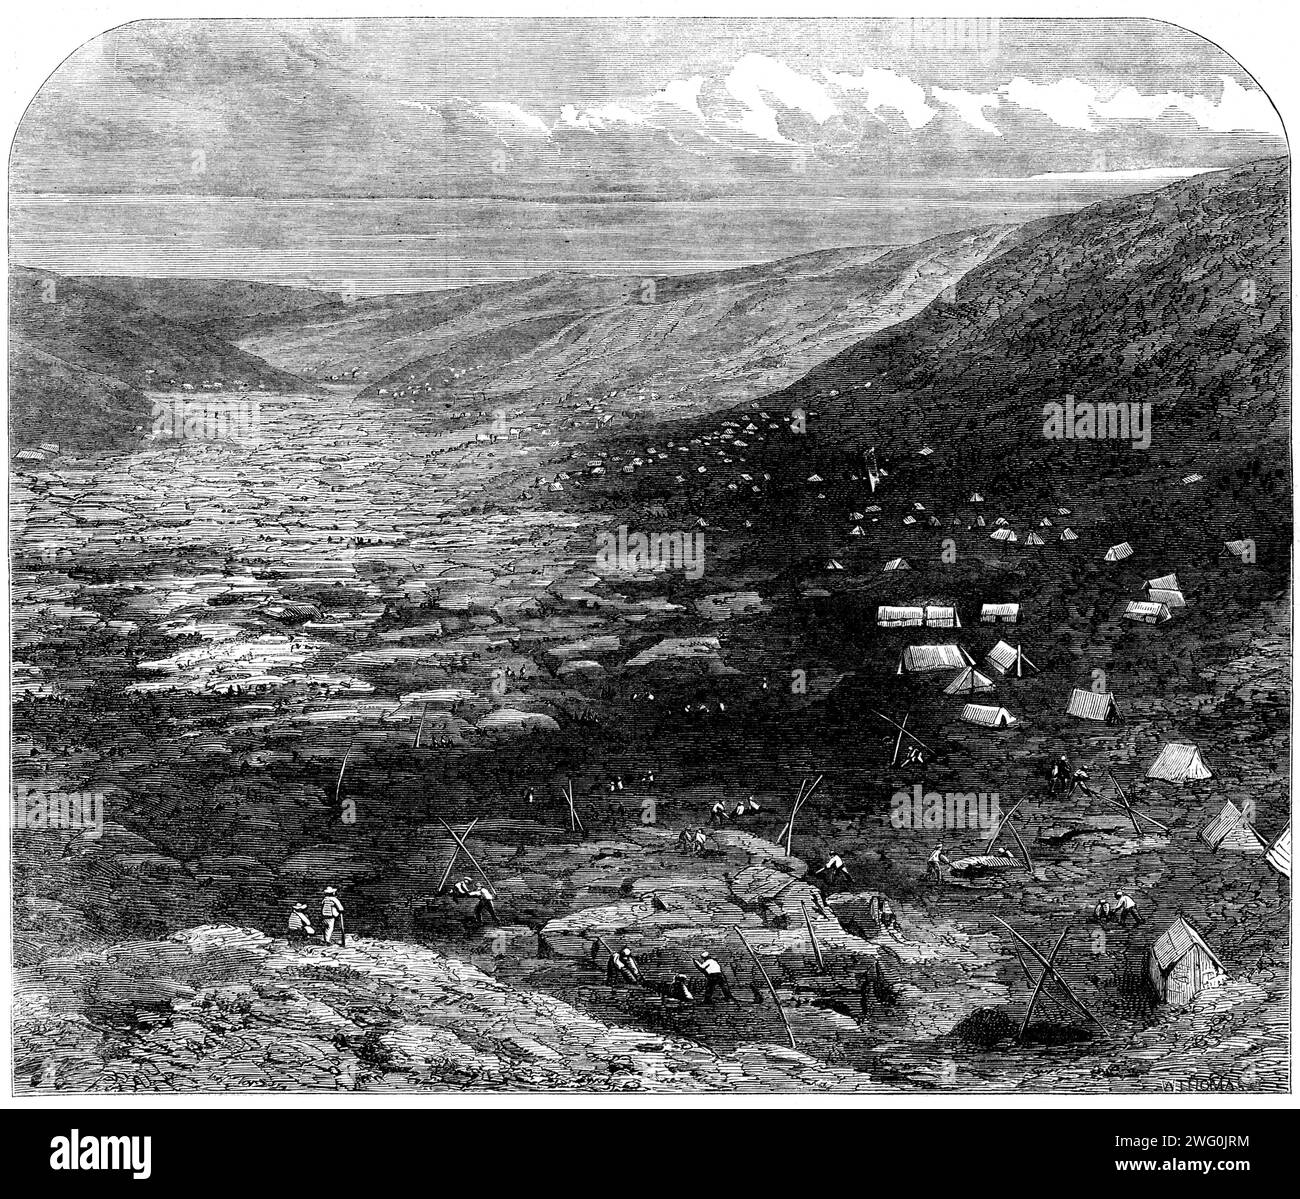 The Tuapeka Goldfields, Otago, New Zealand, 1862. 'The province received a great impetus in June, last year, by the discovery of goldfields situated on a stream called the Tuapeka...The immediate effect was to attract immigrants from Australia and from the neighbouring New Zealand provinces, and since then the population of Otago has doubled, being now estimated at upwards of 25,000. In the space of little more than half a year...gold to the value of more than a million sterling had been exported from Dunedin, and that small body of settlers have suddenly found themselves raised to circumstanc Stock Photo